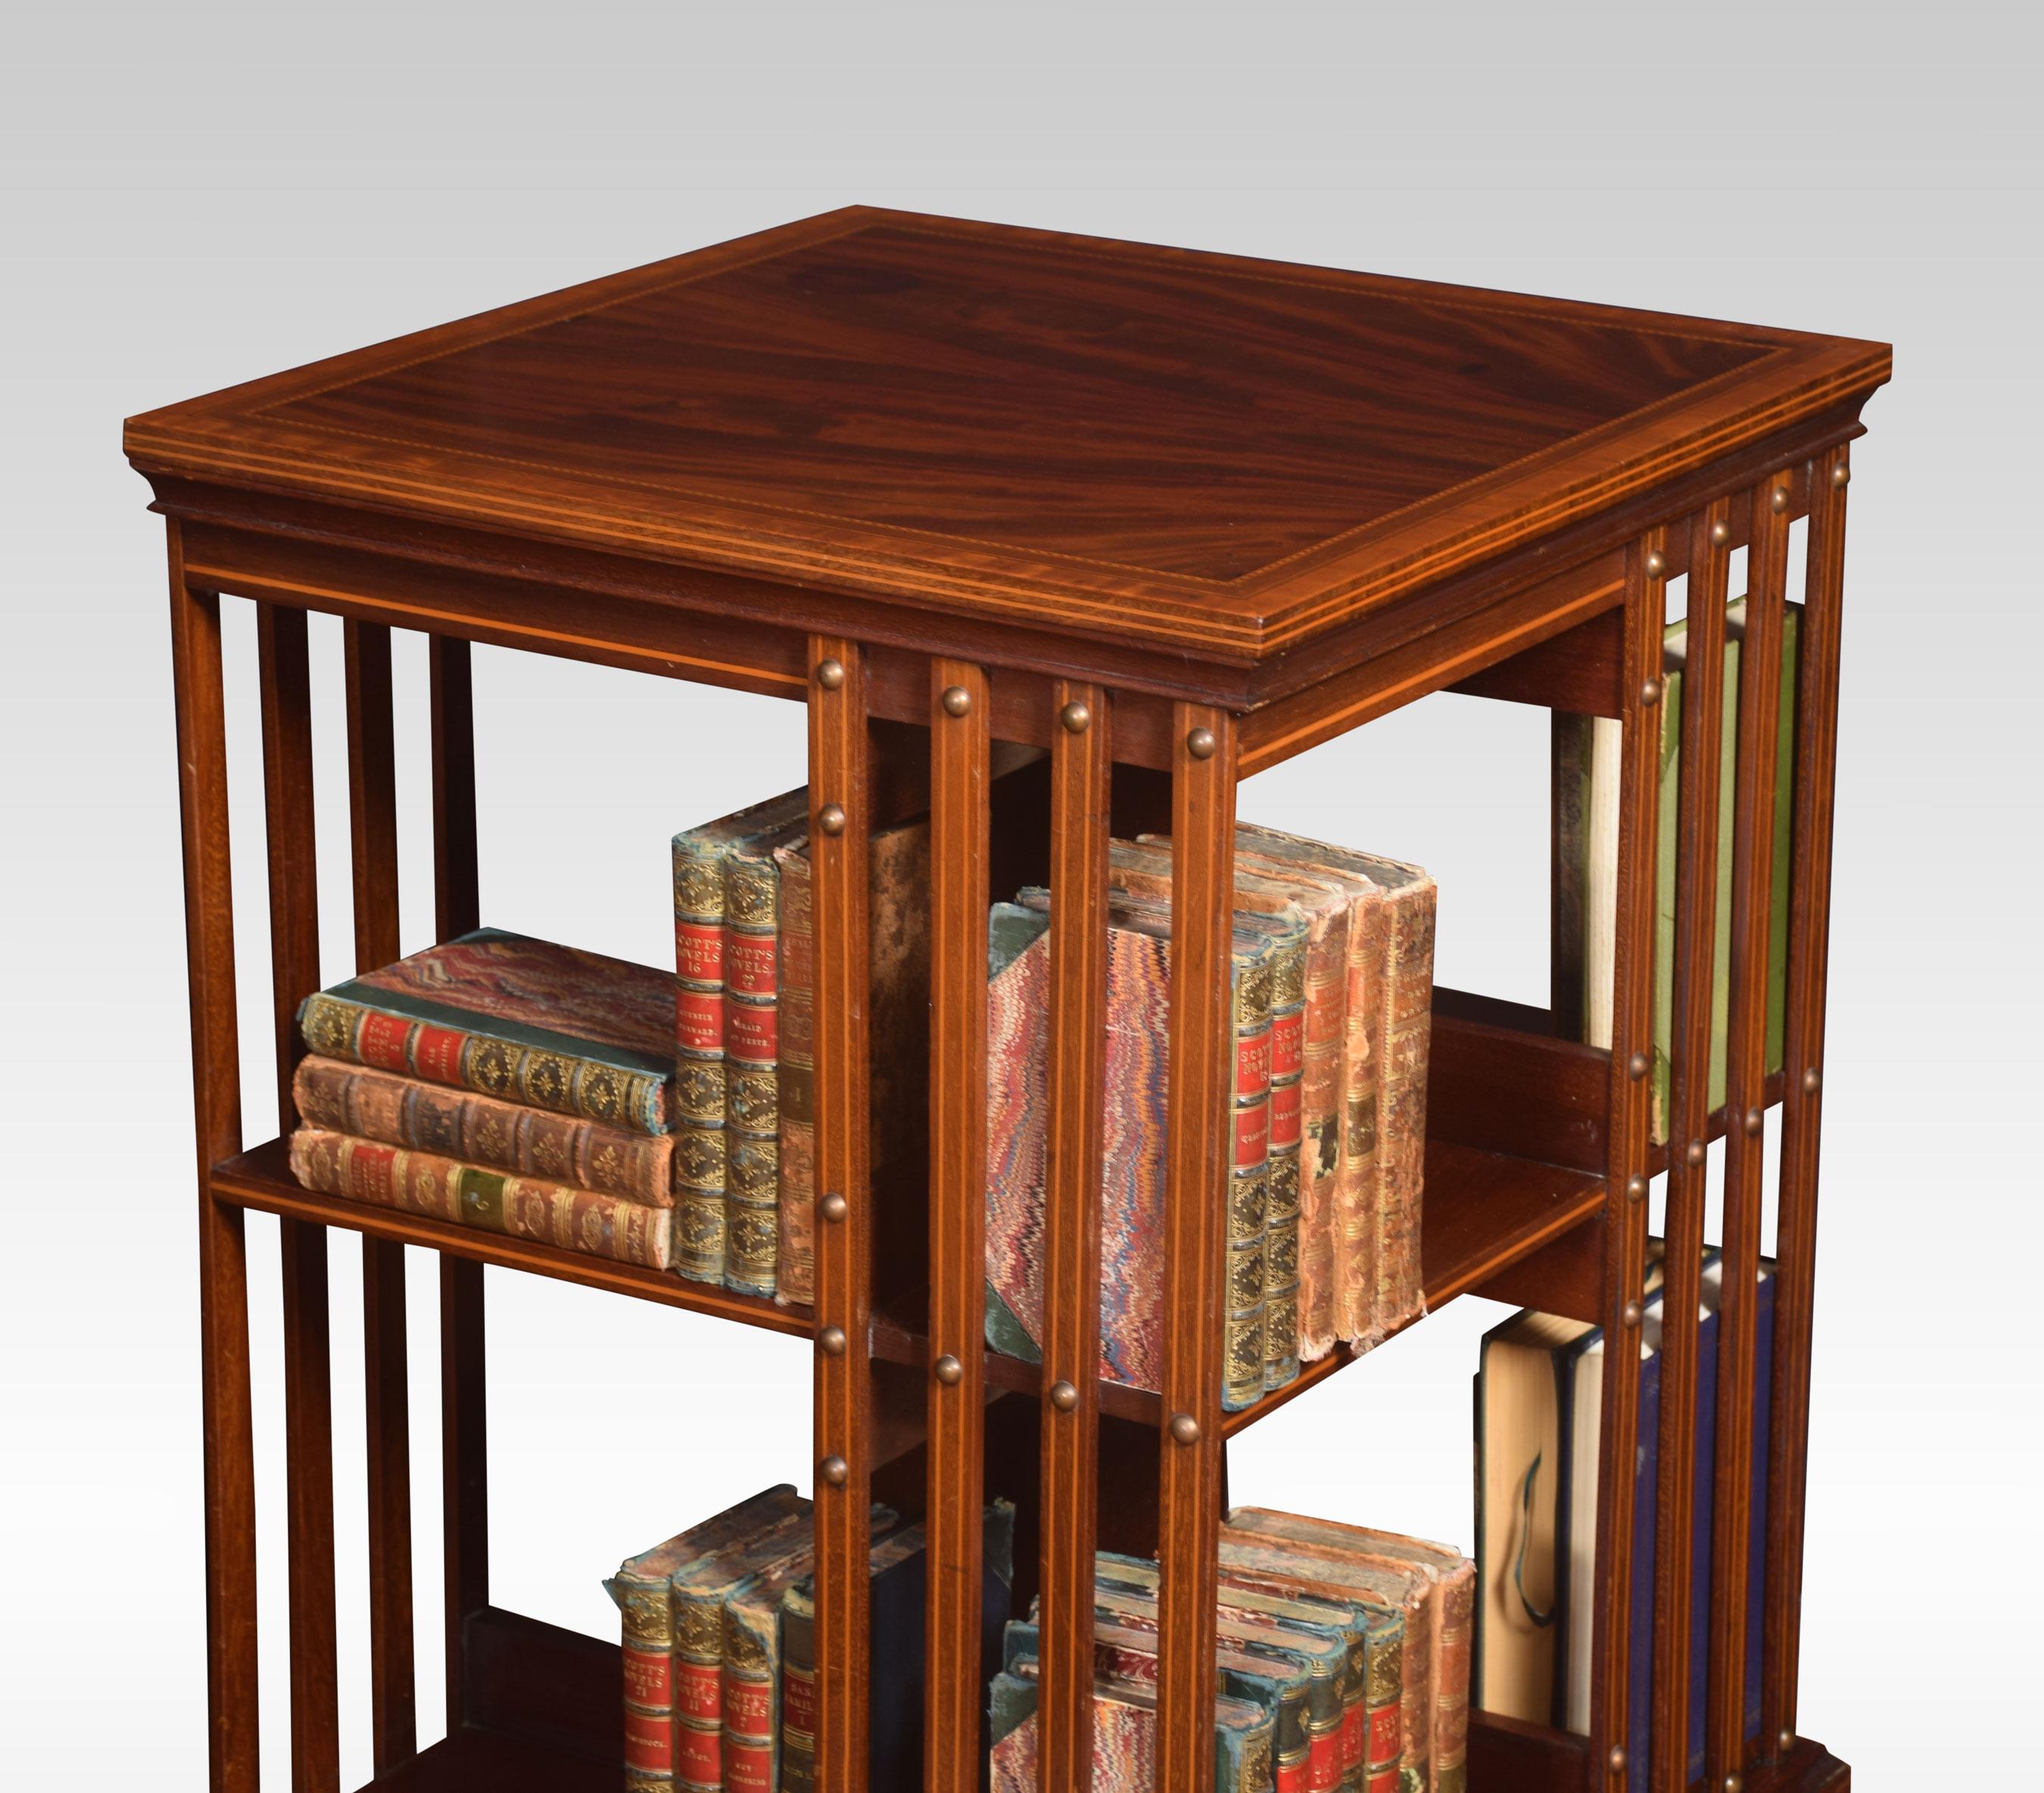 Mahogany revolving bookcase the square top with satinwood crossbanded edge. Above an arrangement off shelves raised up on cruciform base with castors.
Dimensions
Height 34 inches
Width 19.5 inches
Depth 19.5 inches.